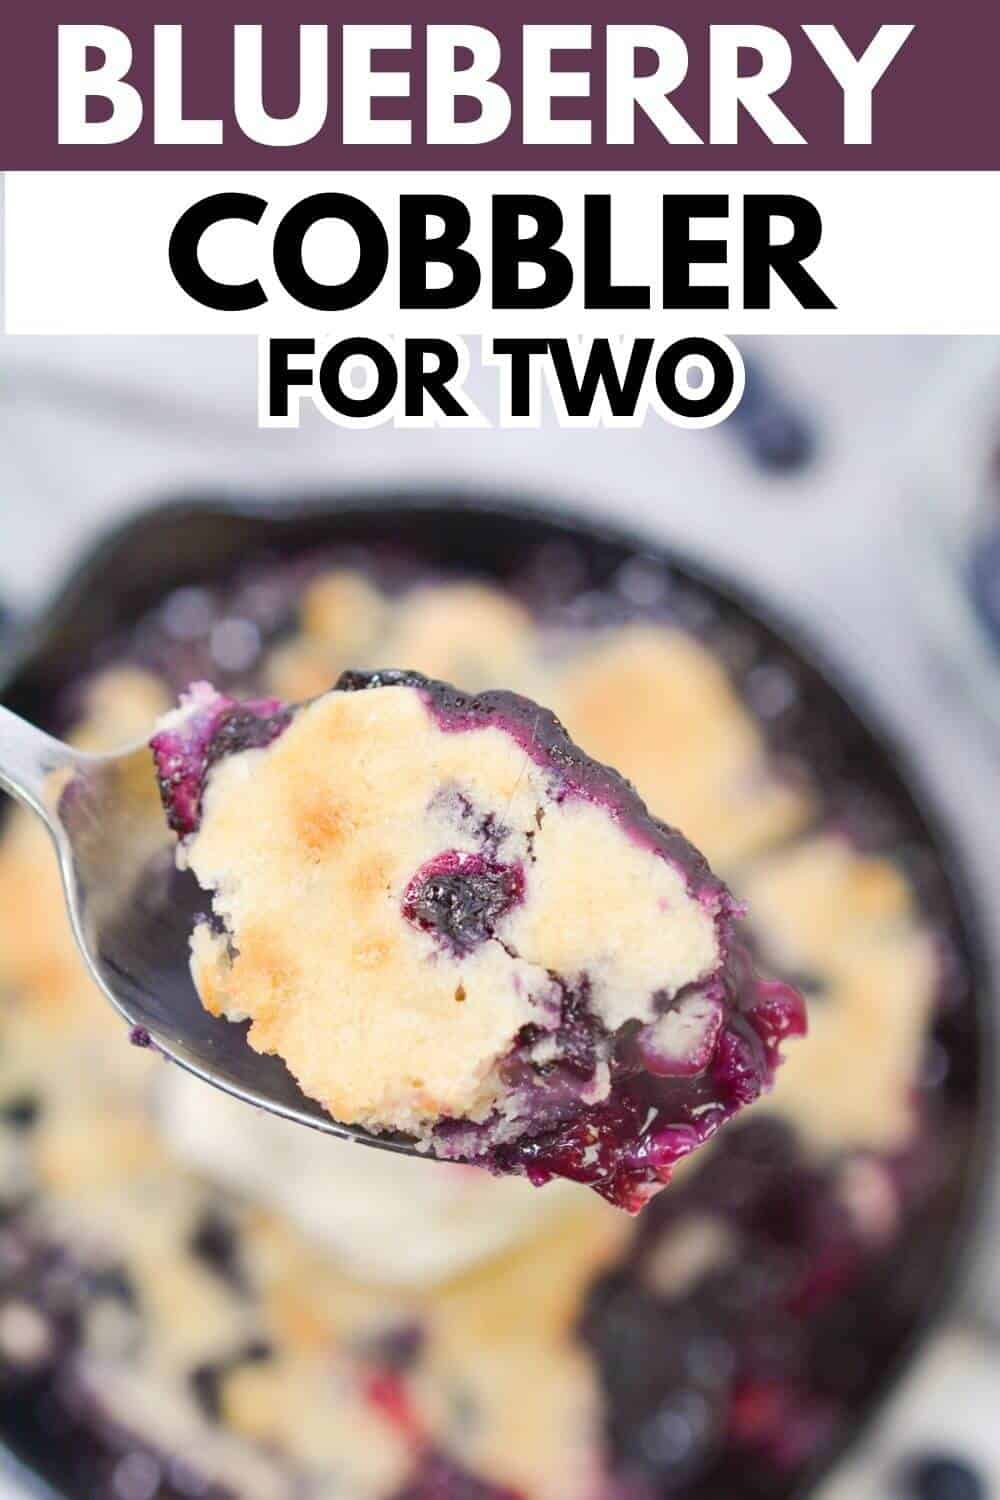 Blueberry cobbler for two with recipe title text overlay.